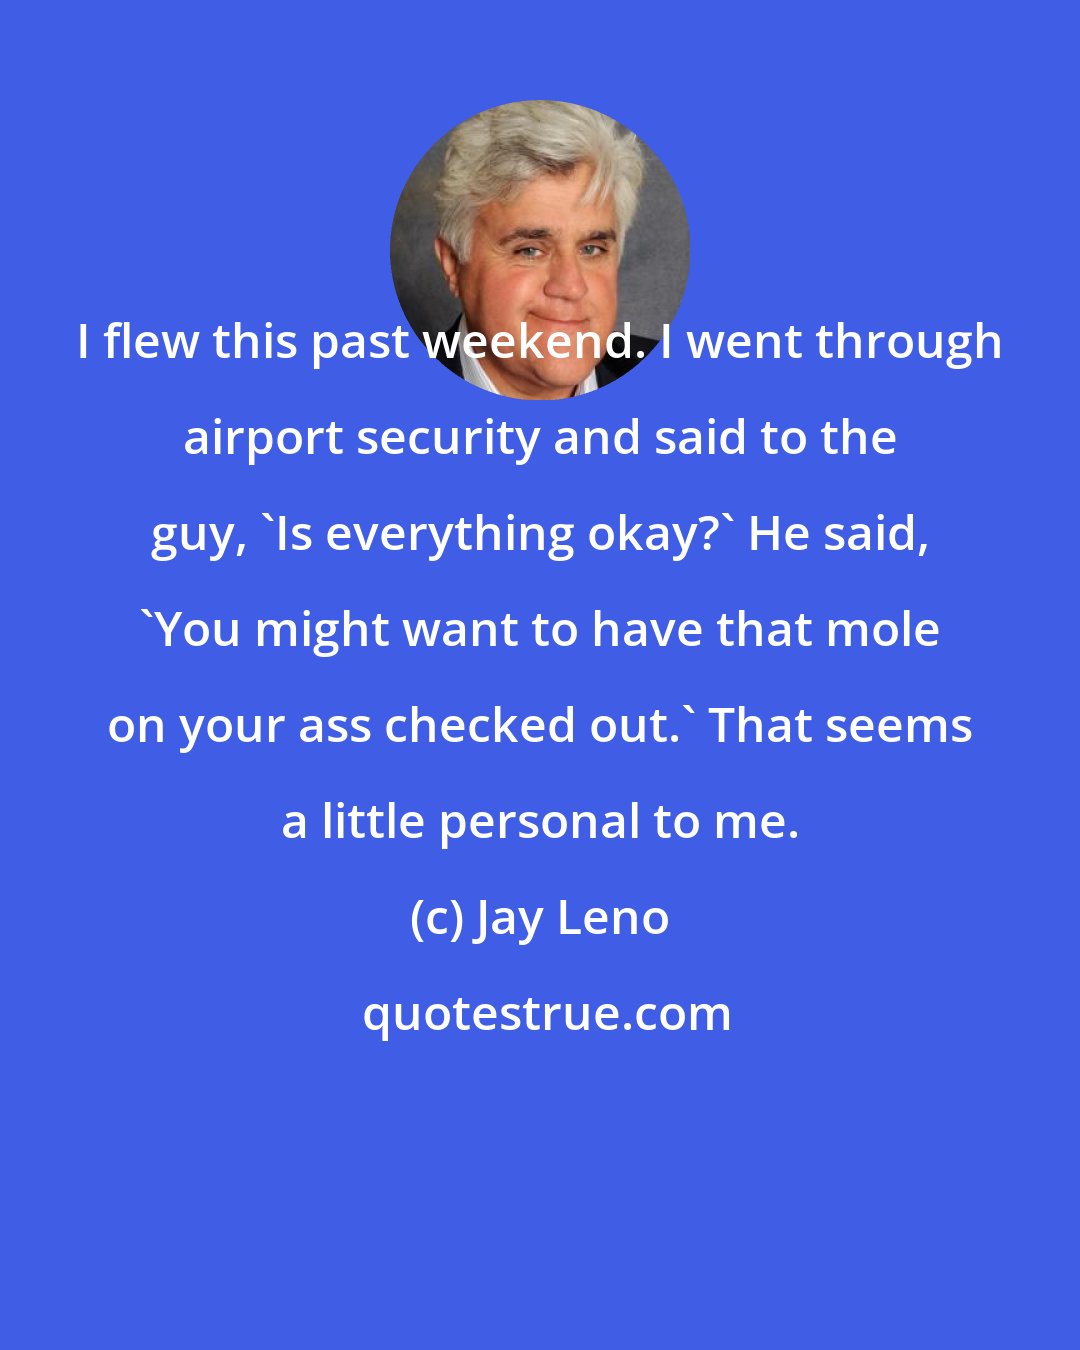 Jay Leno: I flew this past weekend. I went through airport security and said to the guy, 'Is everything okay?' He said, 'You might want to have that mole on your ass checked out.' That seems a little personal to me.